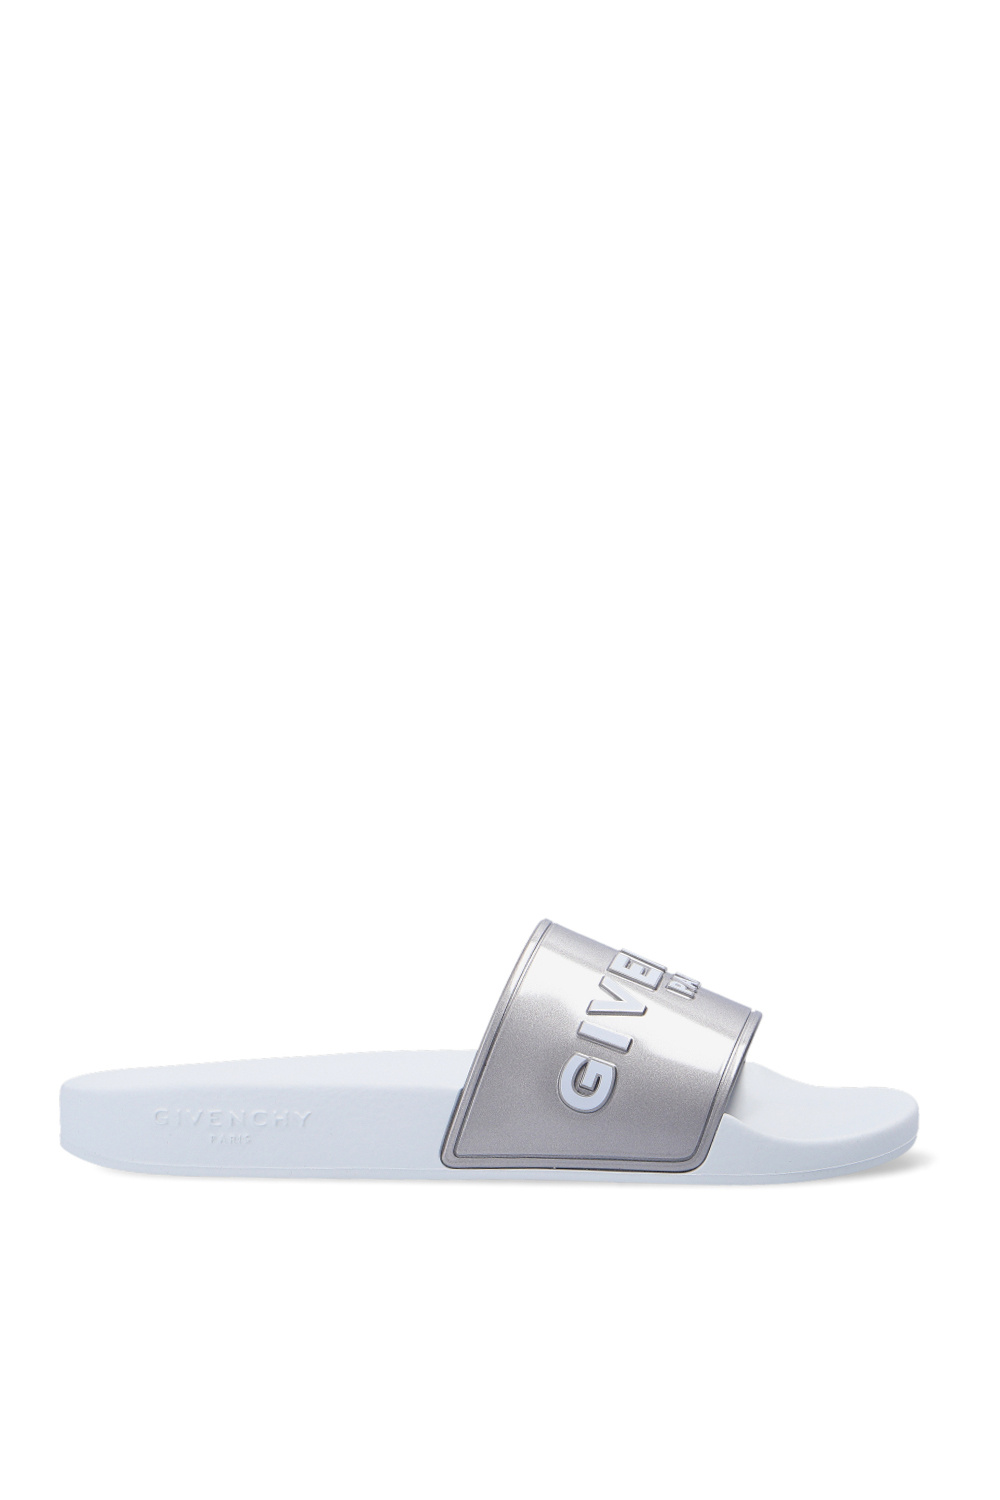 Givenchy Rubber slides with logo